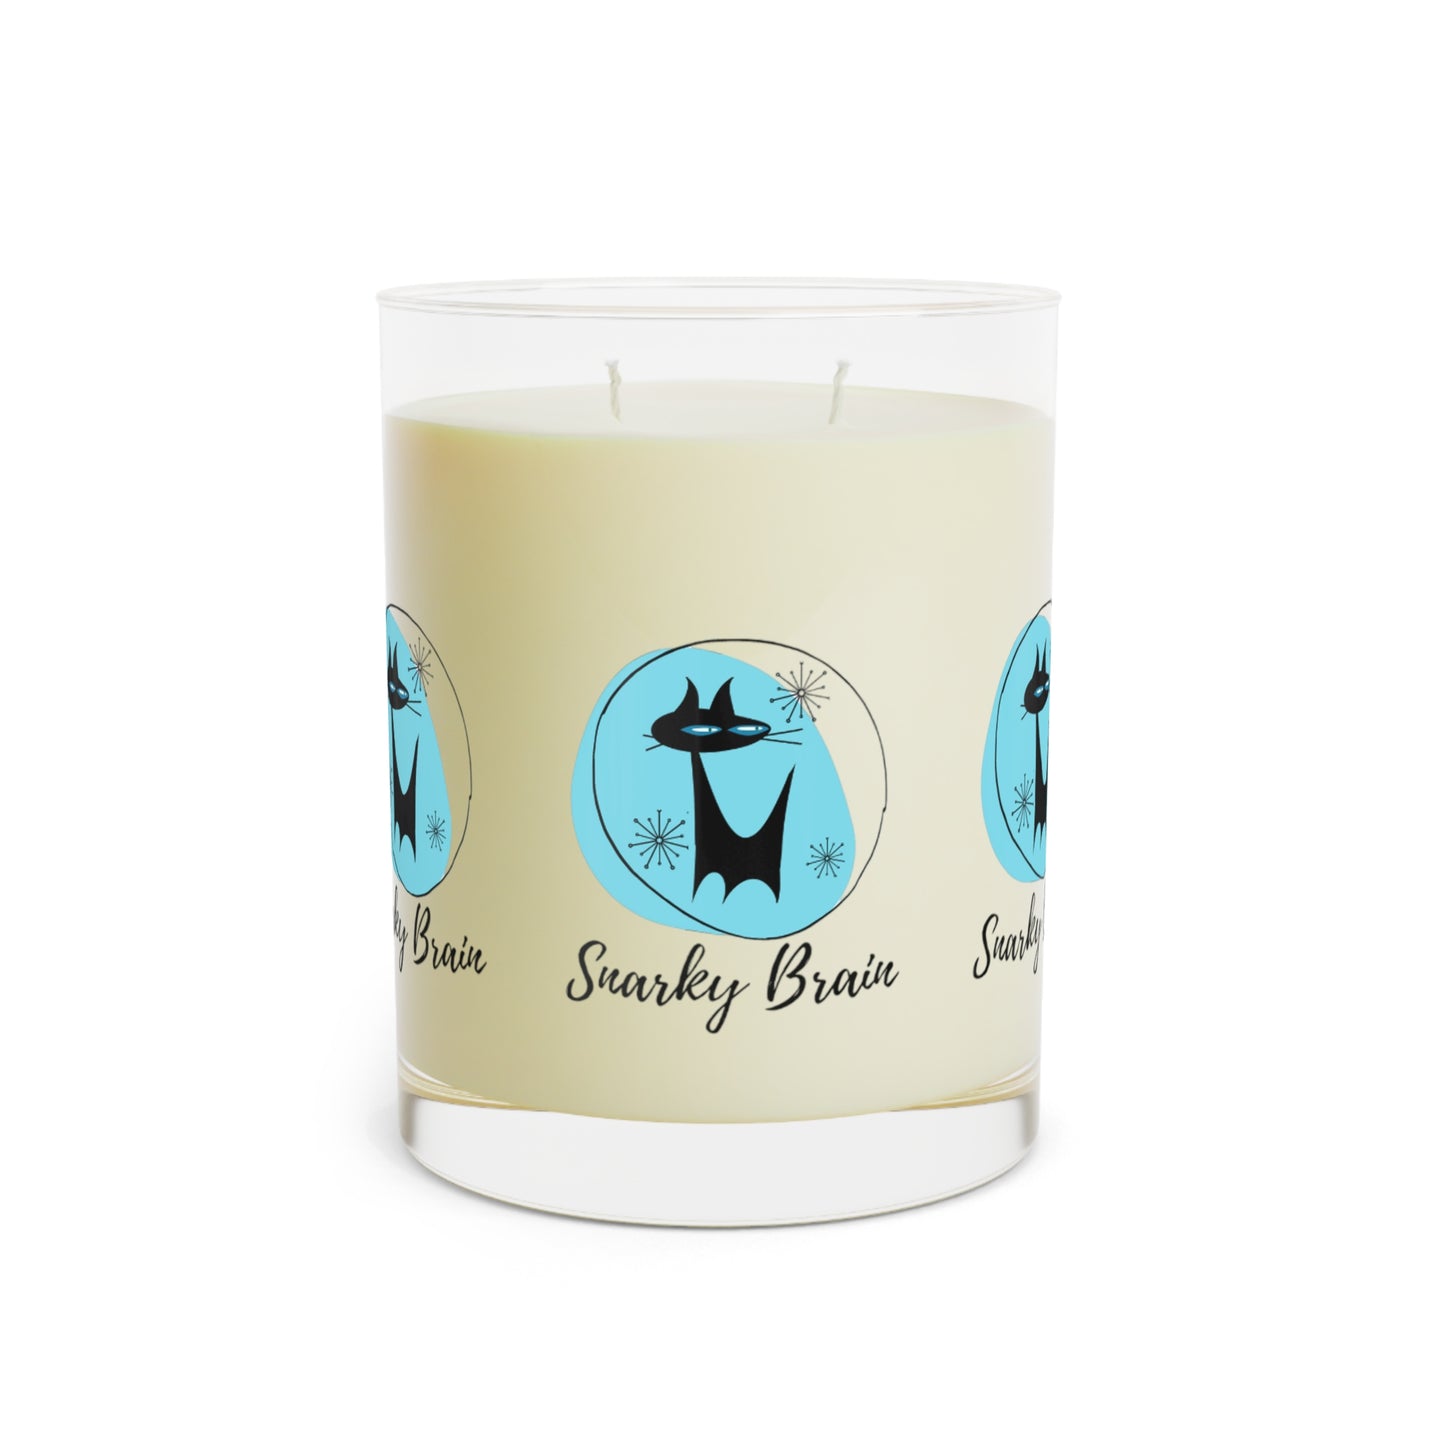 Snarky Brain Midcentury Modern Atomic Black Cat  Logo Aromatherapy Natural Essential Oils Decorative Scented Candle - Full Glass, 11oz